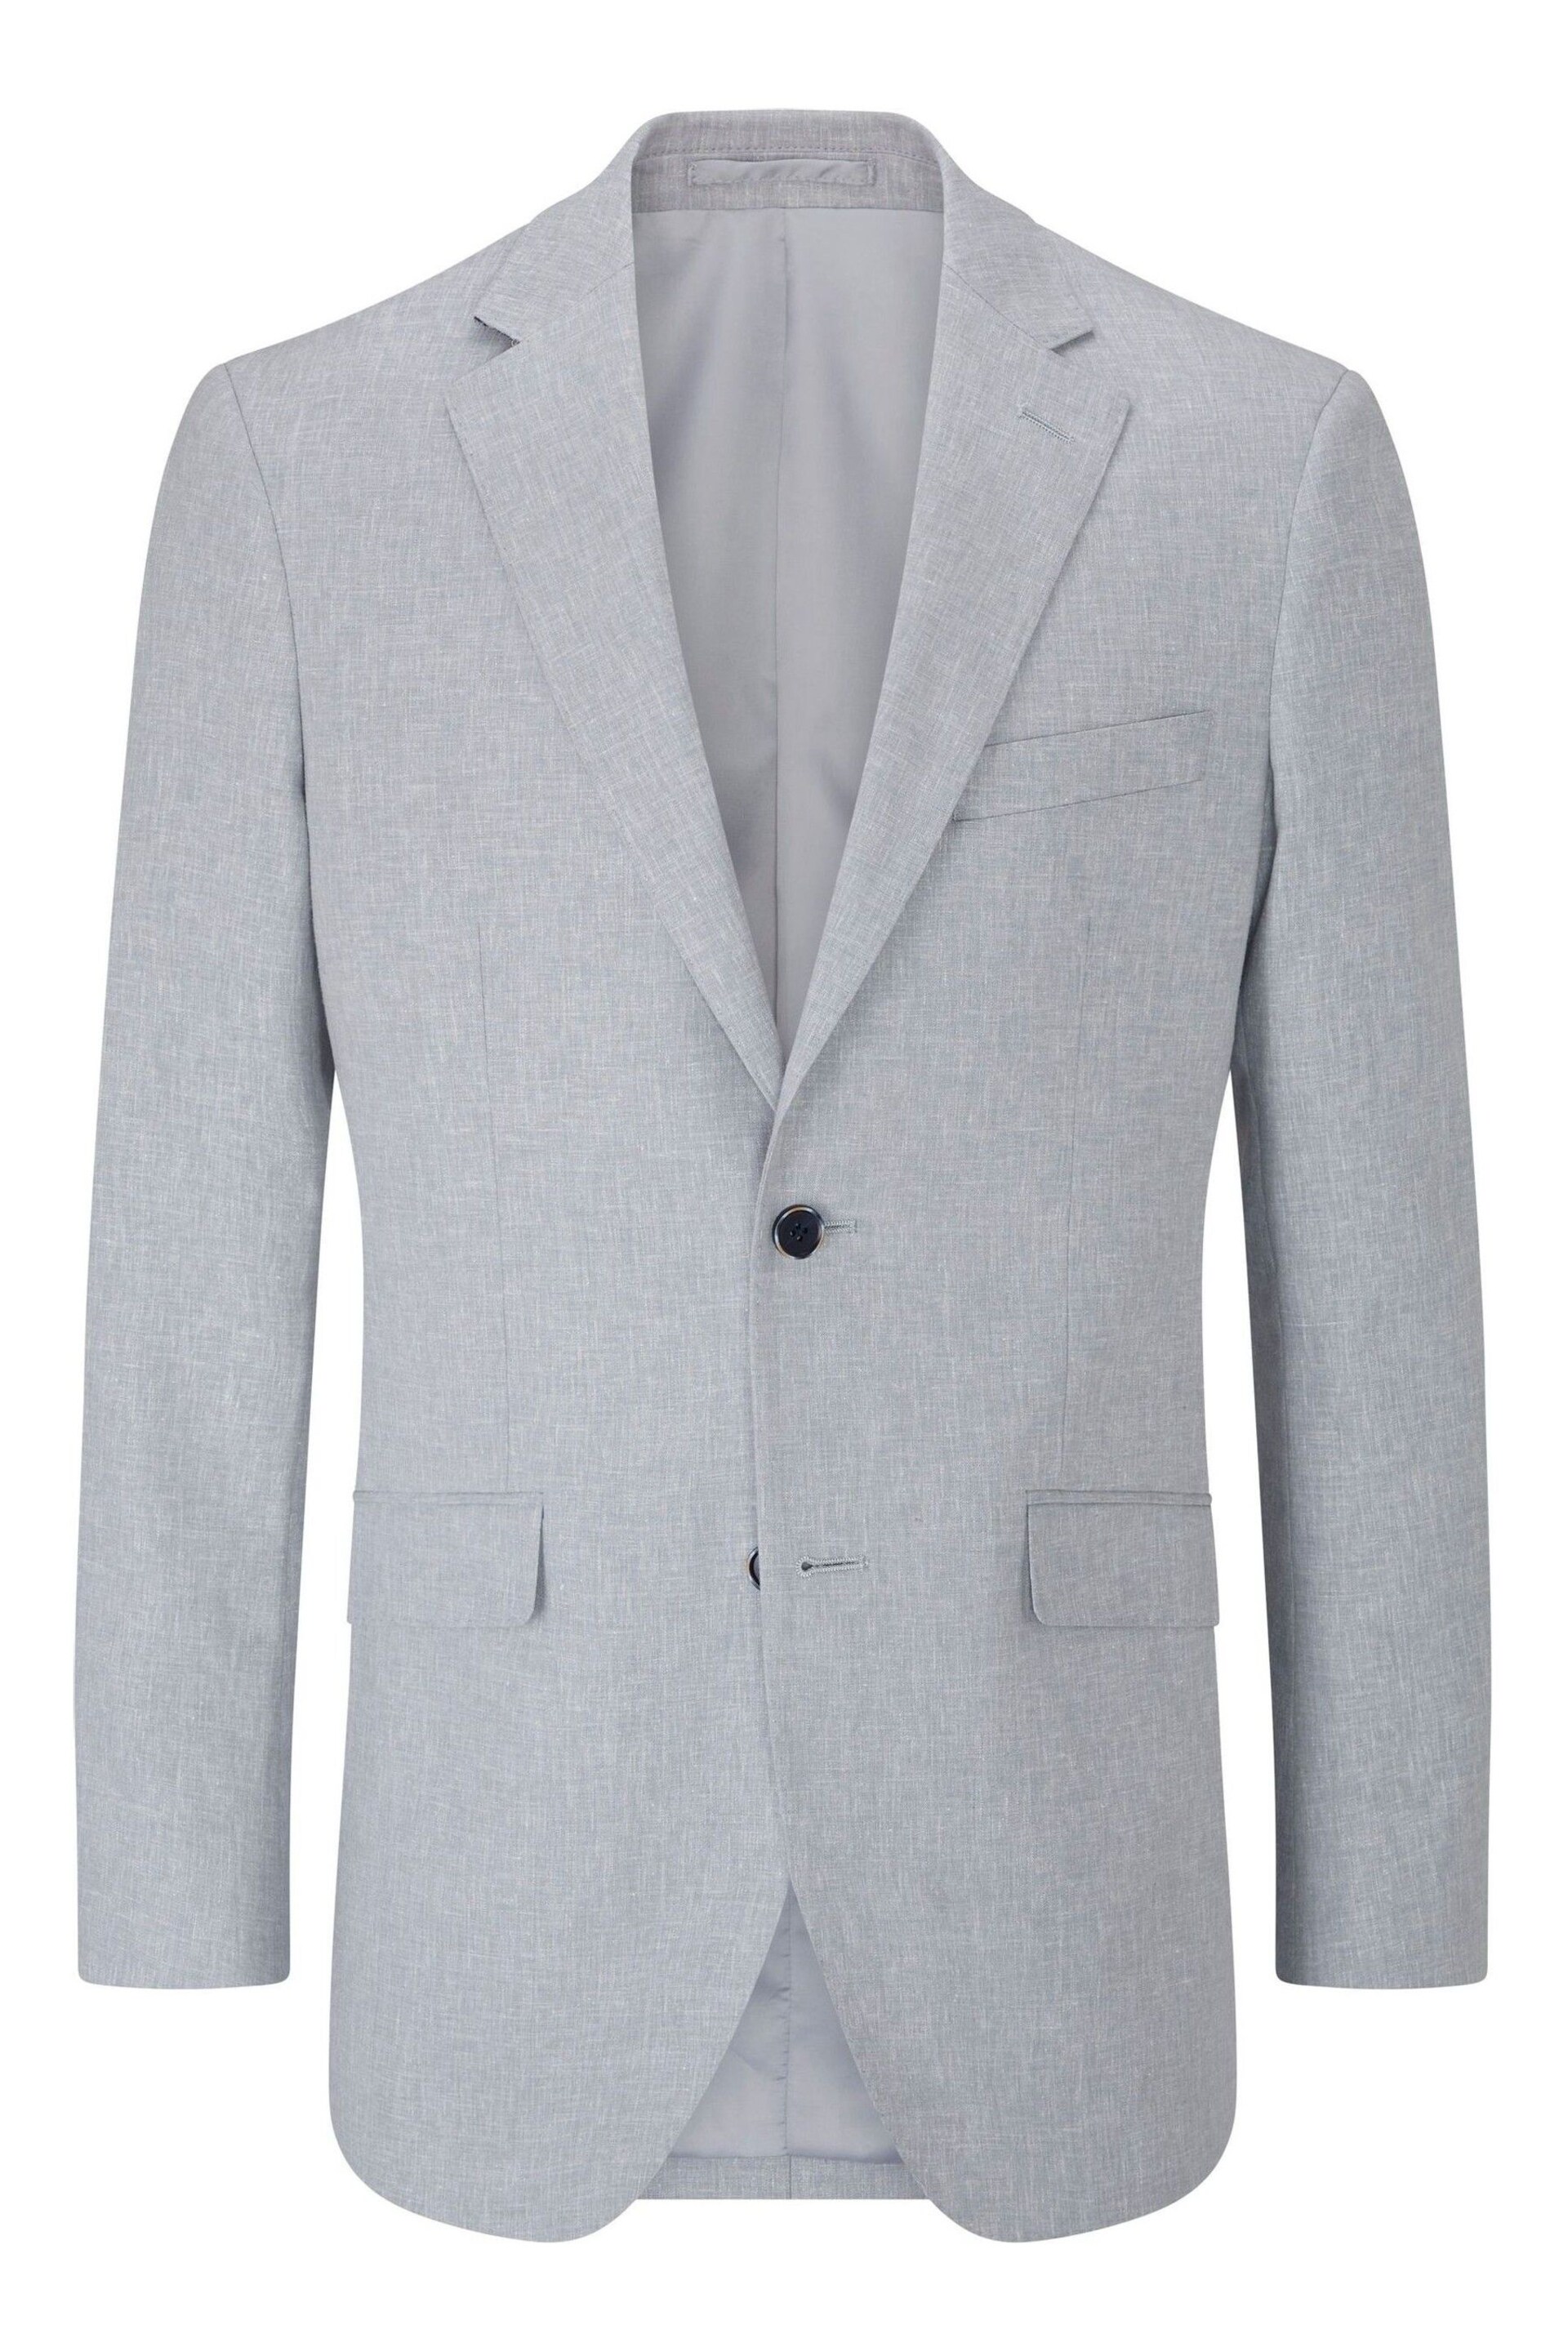 Skopes Tailored Fit Silver Tuscany Linen Blend Suit: Jacket - Image 4 of 4